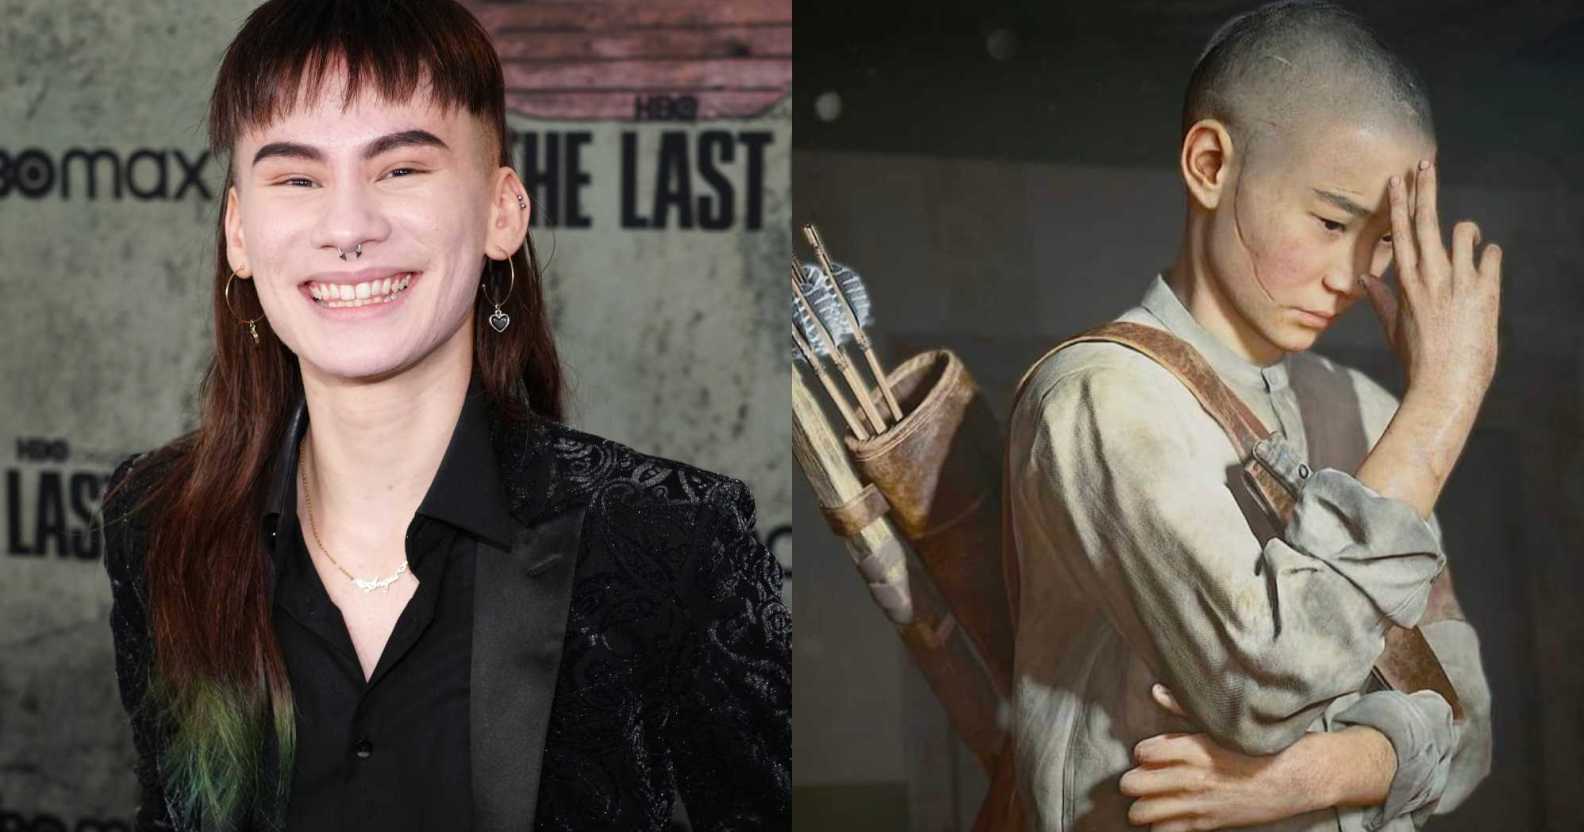 Ian Alexander played Lev in The Last of Us